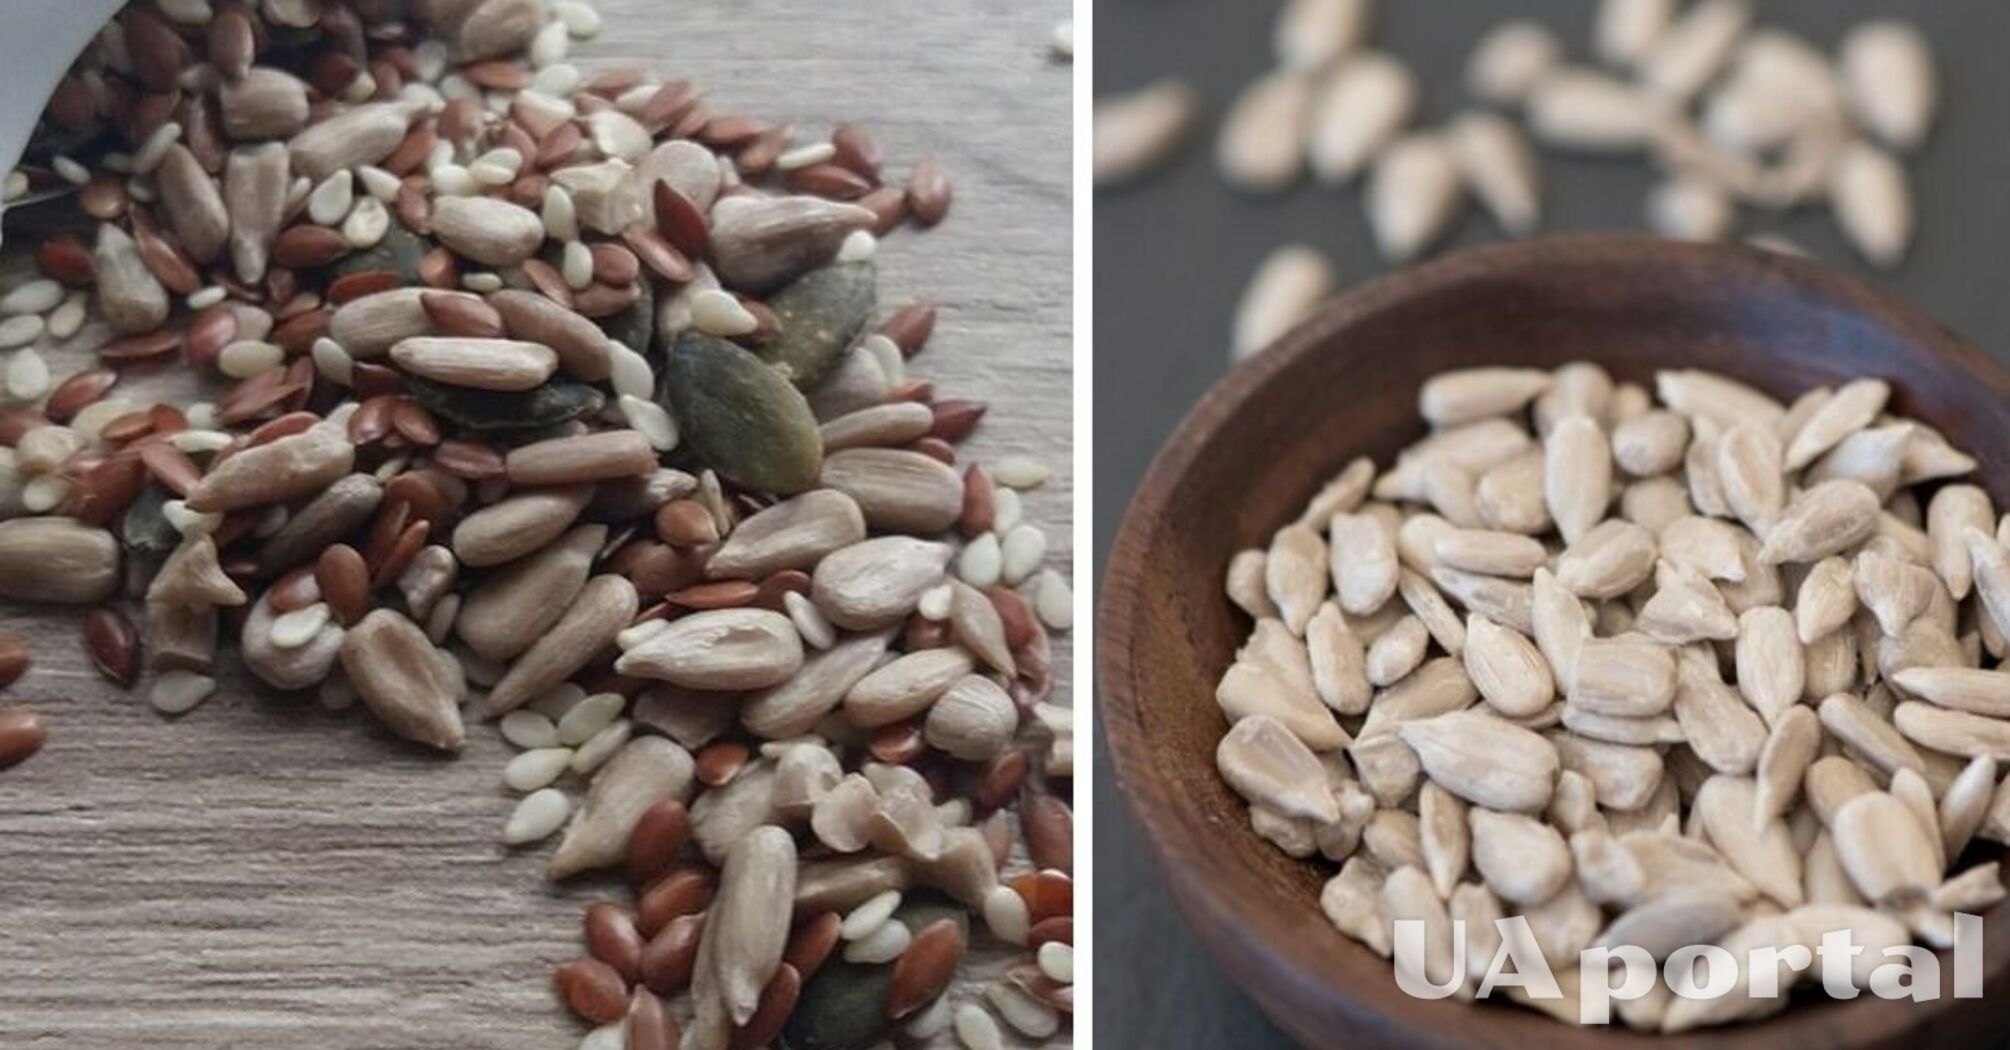 What seeds have a beneficial effect on health